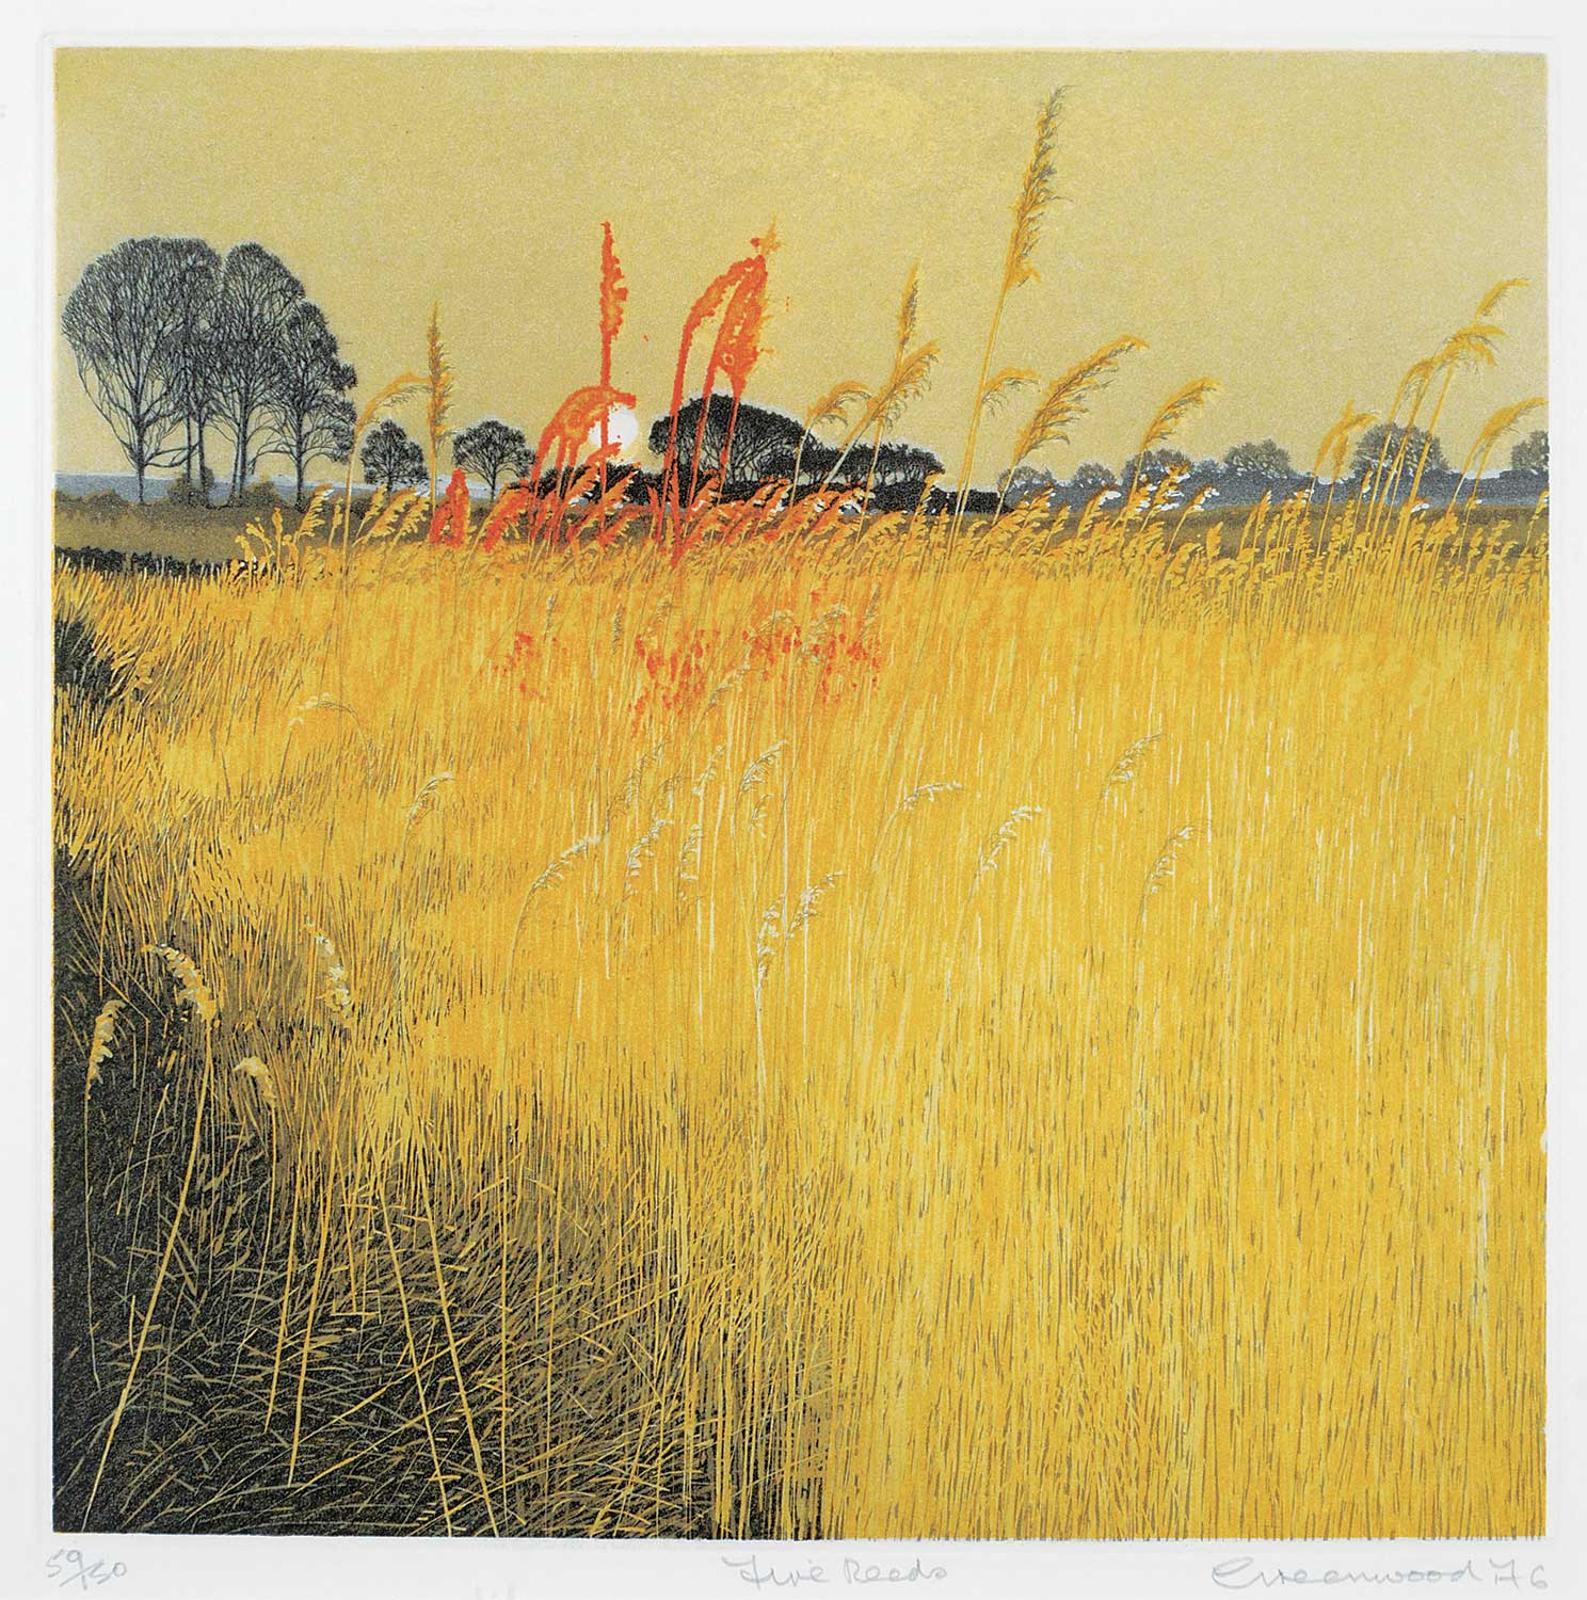 Phil Greenwood (1943) - Fire Reeds  #59/150